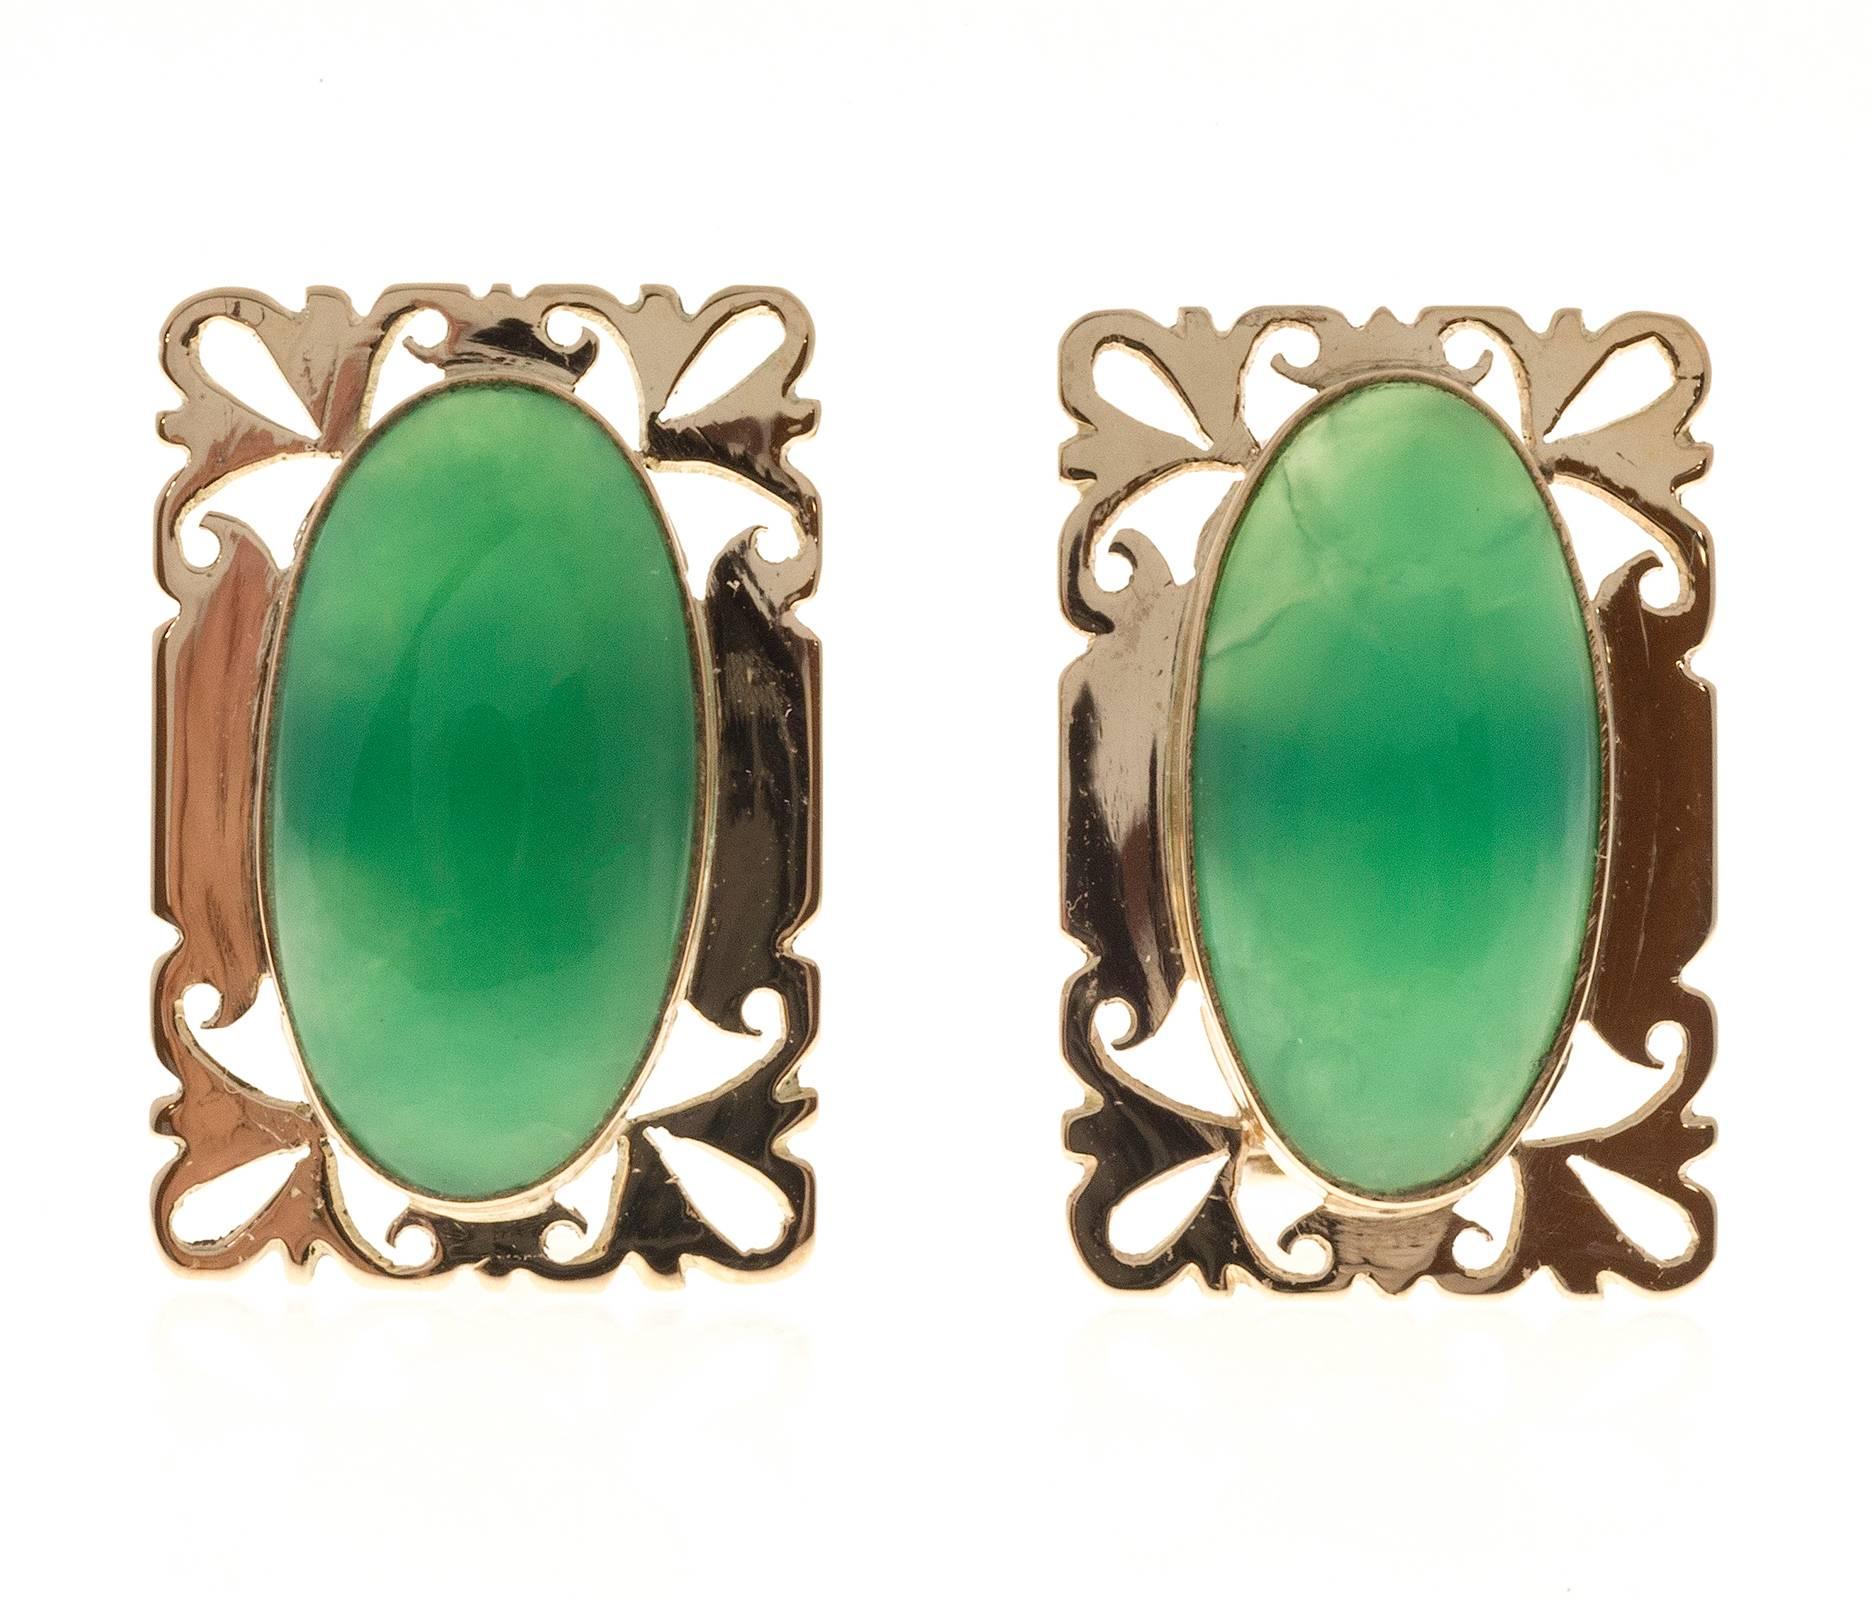 1950s handmade cufflinks with bright green Chrysophase in 18k yellow gold.

2 oval green Chrysophase, 16.46 x 8.69 x 4.54mm
18k yellow gold
Tested and stamped:  18k
6.0 grams
Top to bottom: 13.76mm or .54 inch
Width:  20.81mm or .82